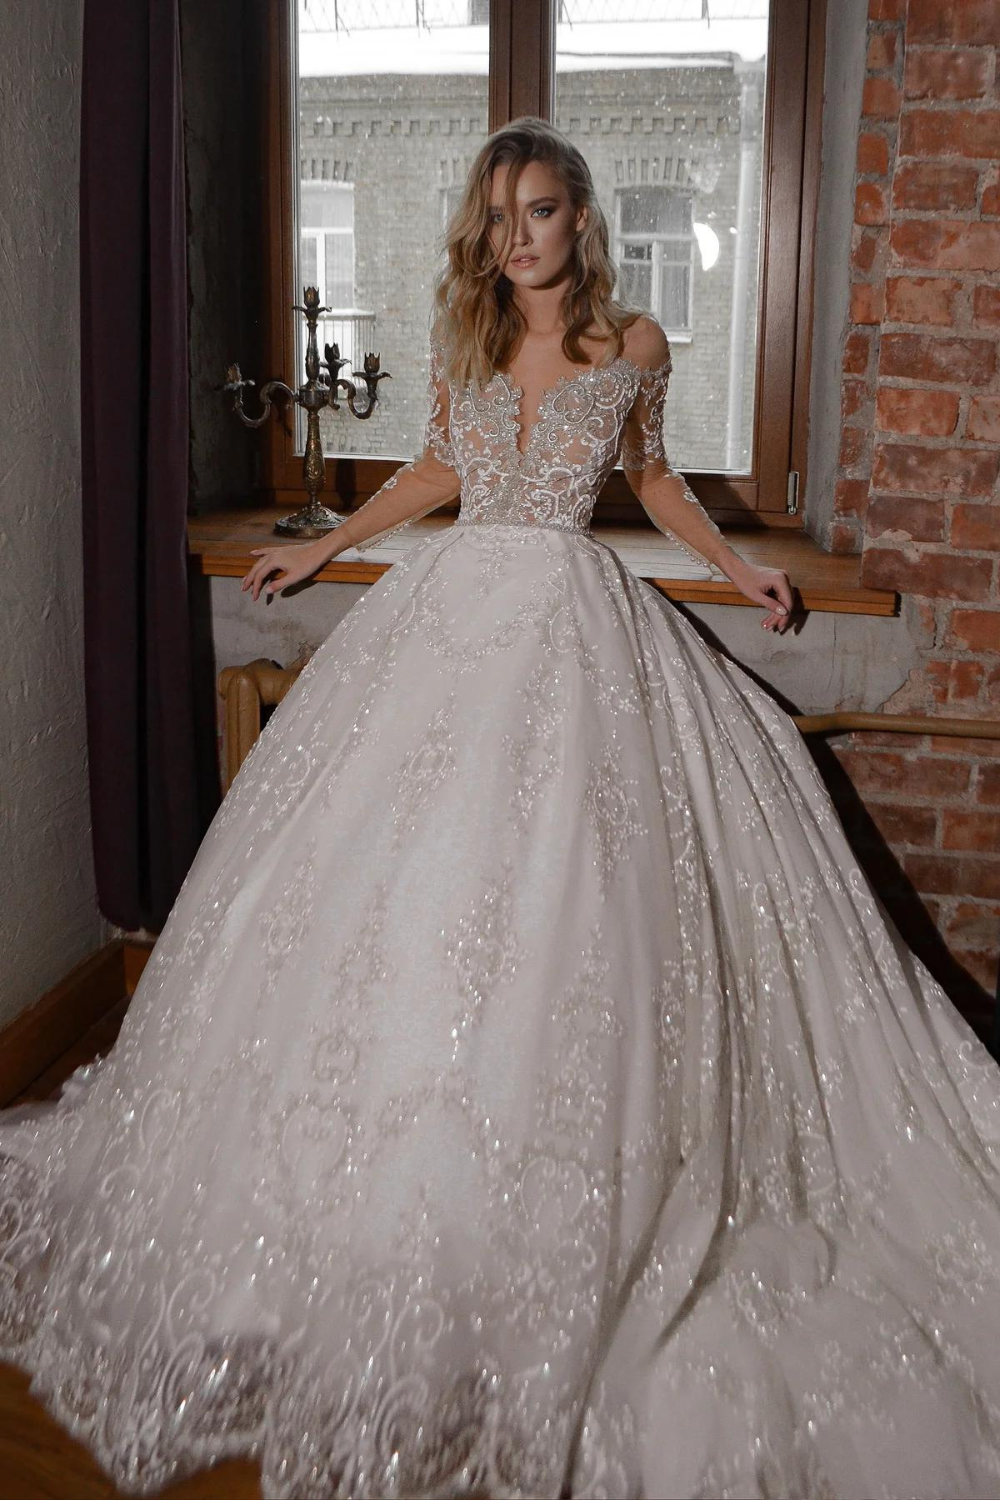 22 Fall Wedding Dresses That Are Out of This World Beautiful